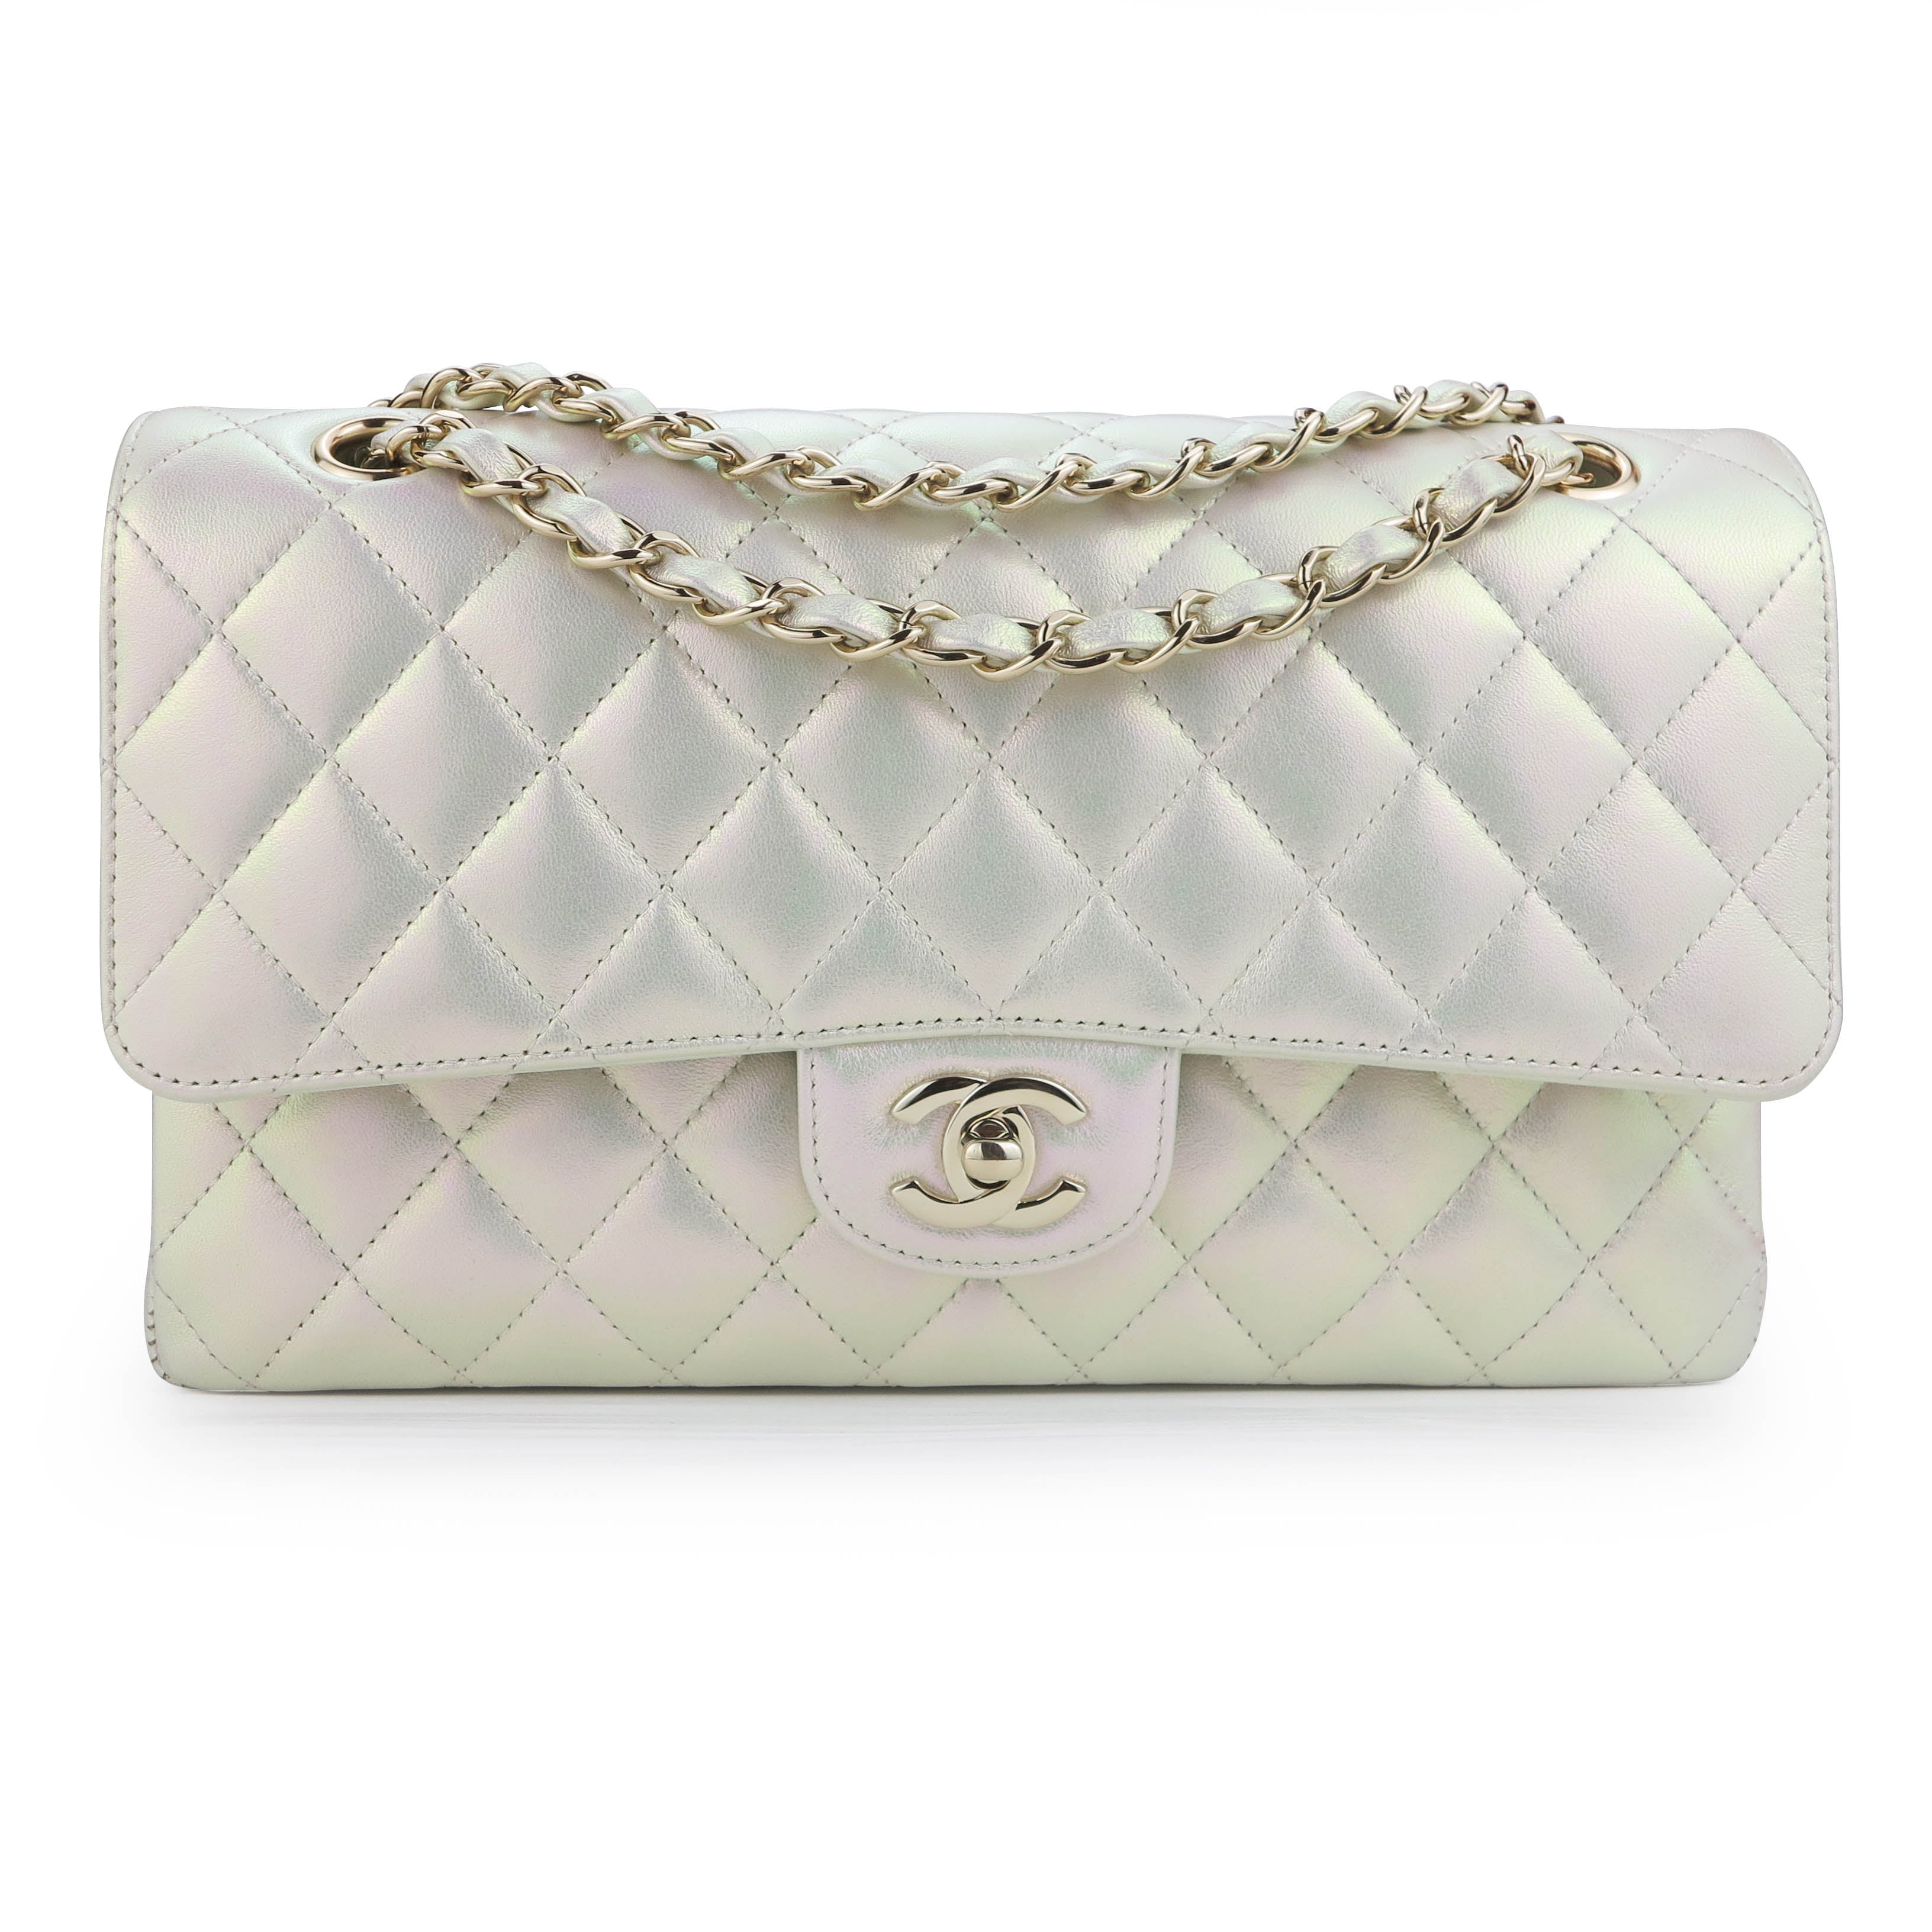 CHANEL Medium Classic Double Flap Bag in 20B Iridescent Ivory